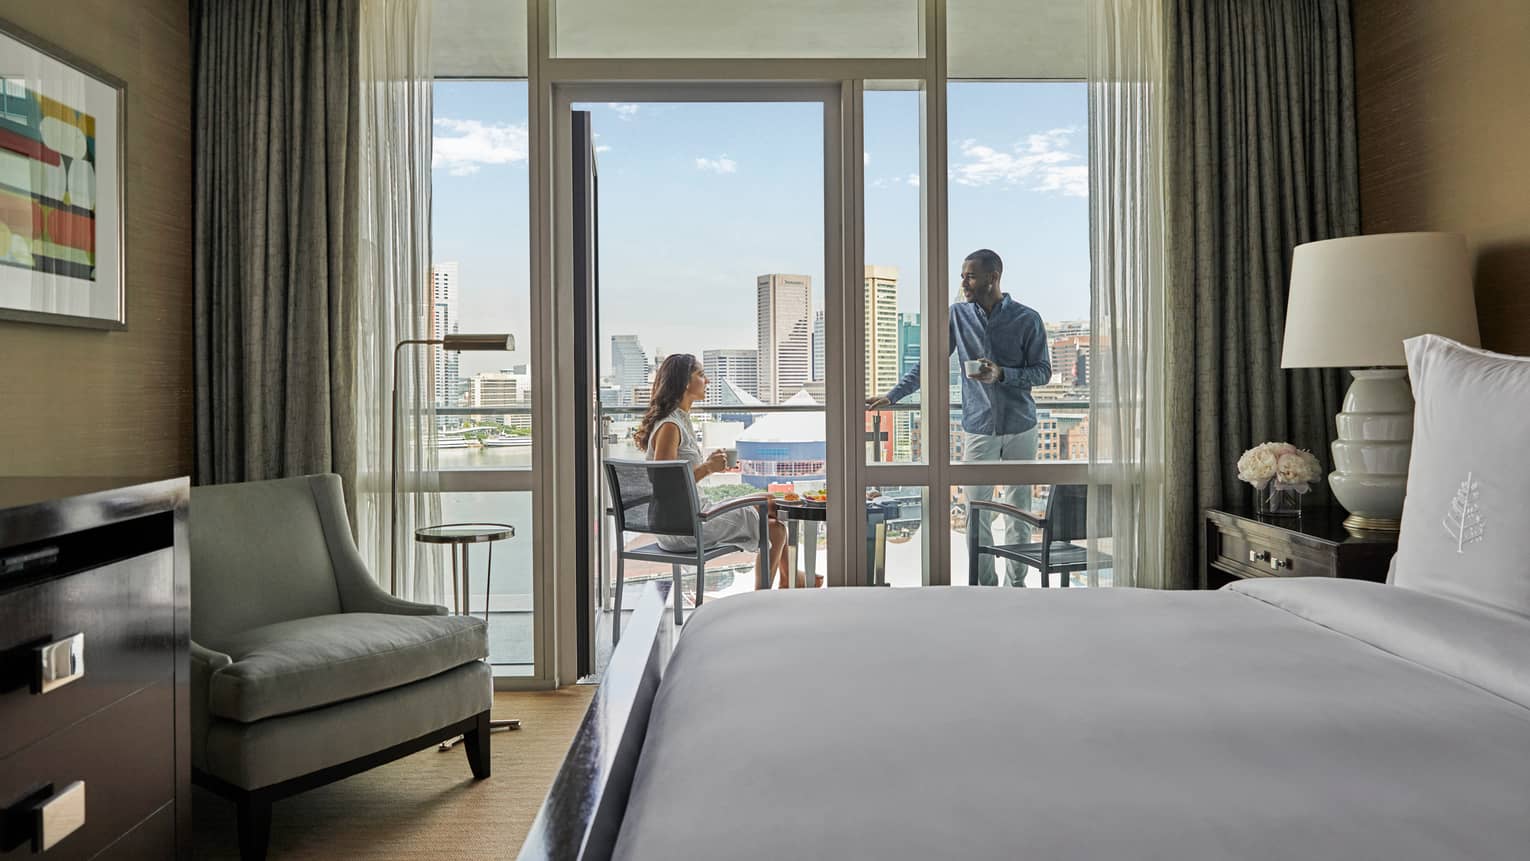 Hotel room with king bed, light grey arm chair, opening to outdoor balcony with two people talking